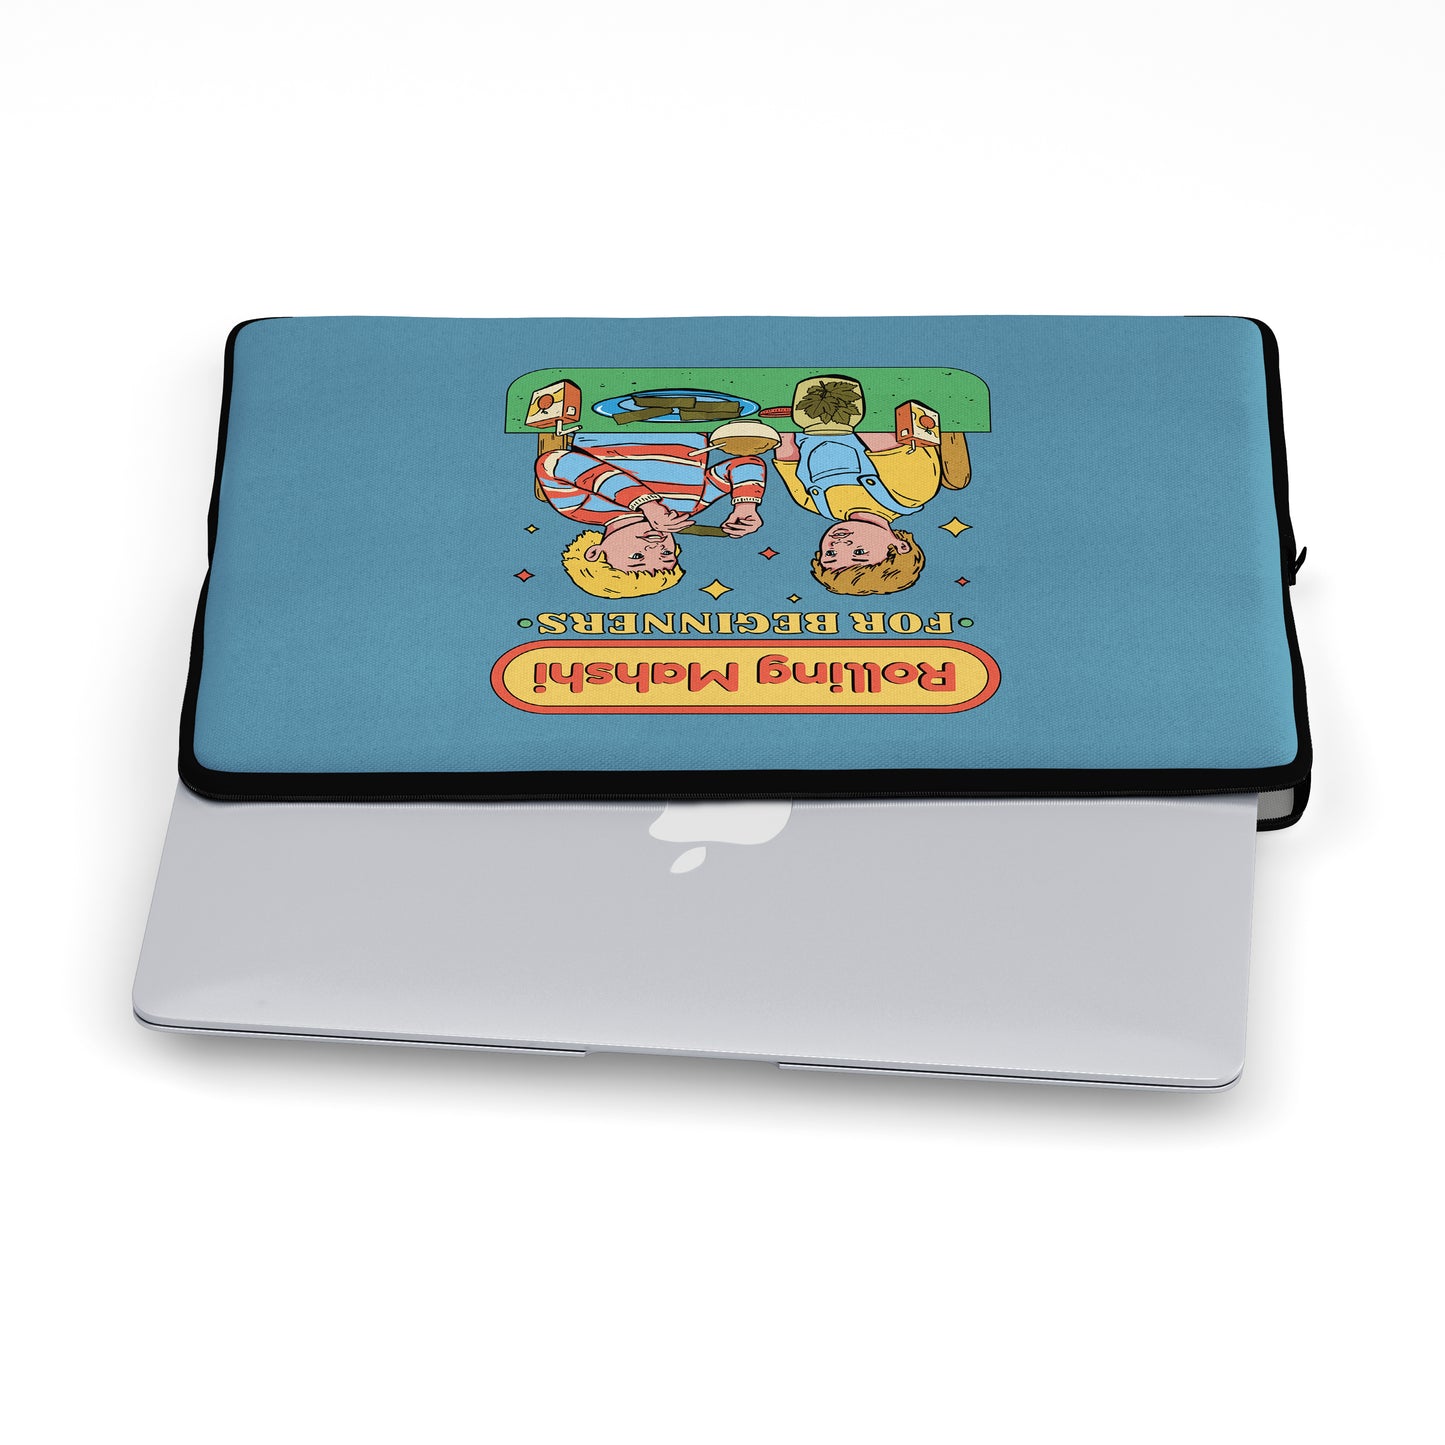 Rolling Mahshi for beginners Laptop Sleeve